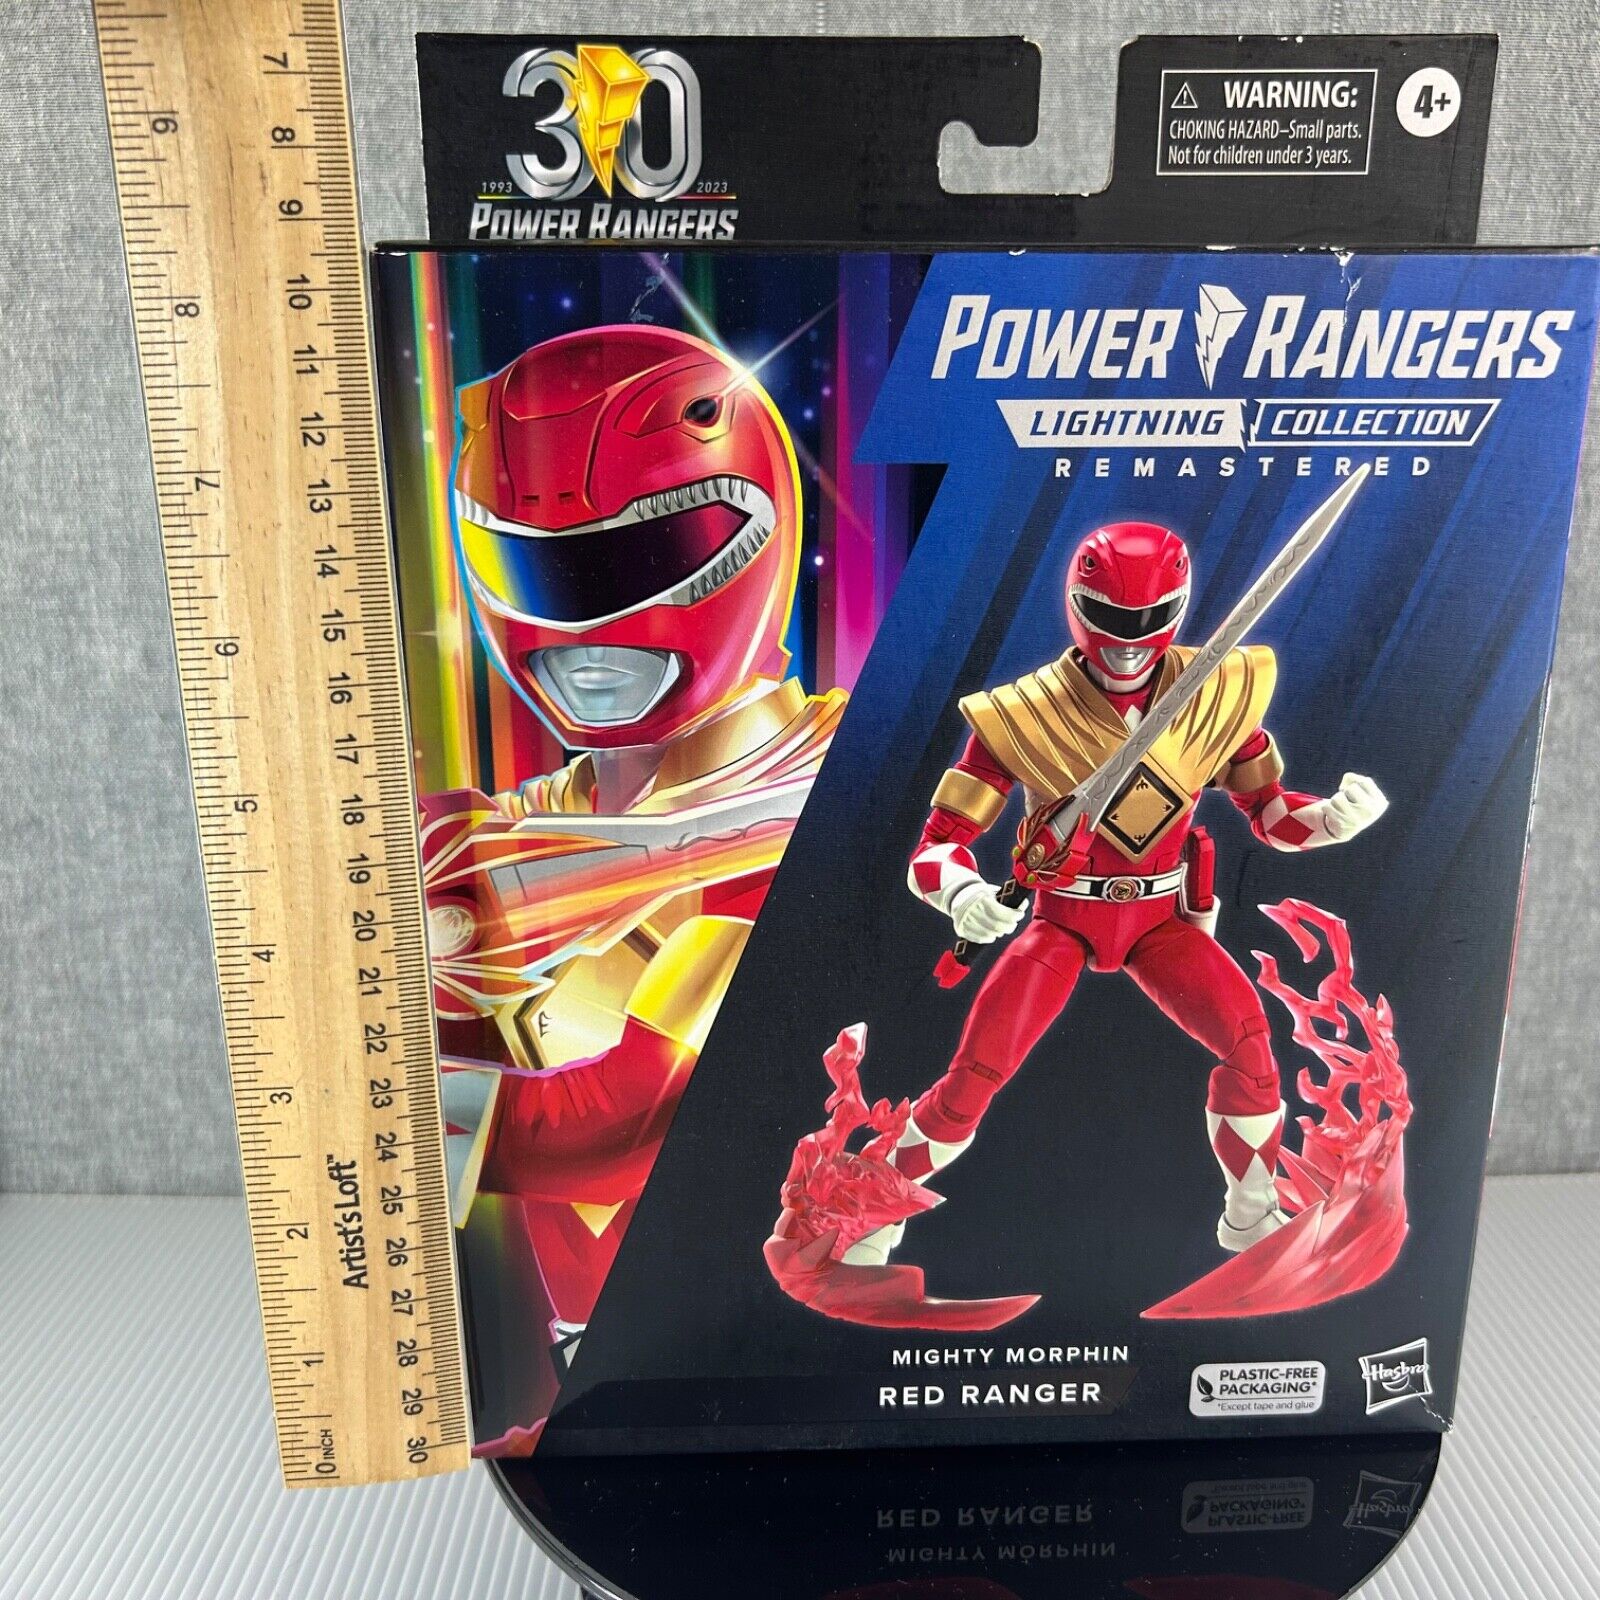 Power Rangers Lightning Collection Remastered Mighty Morphin Red Ranger Figure